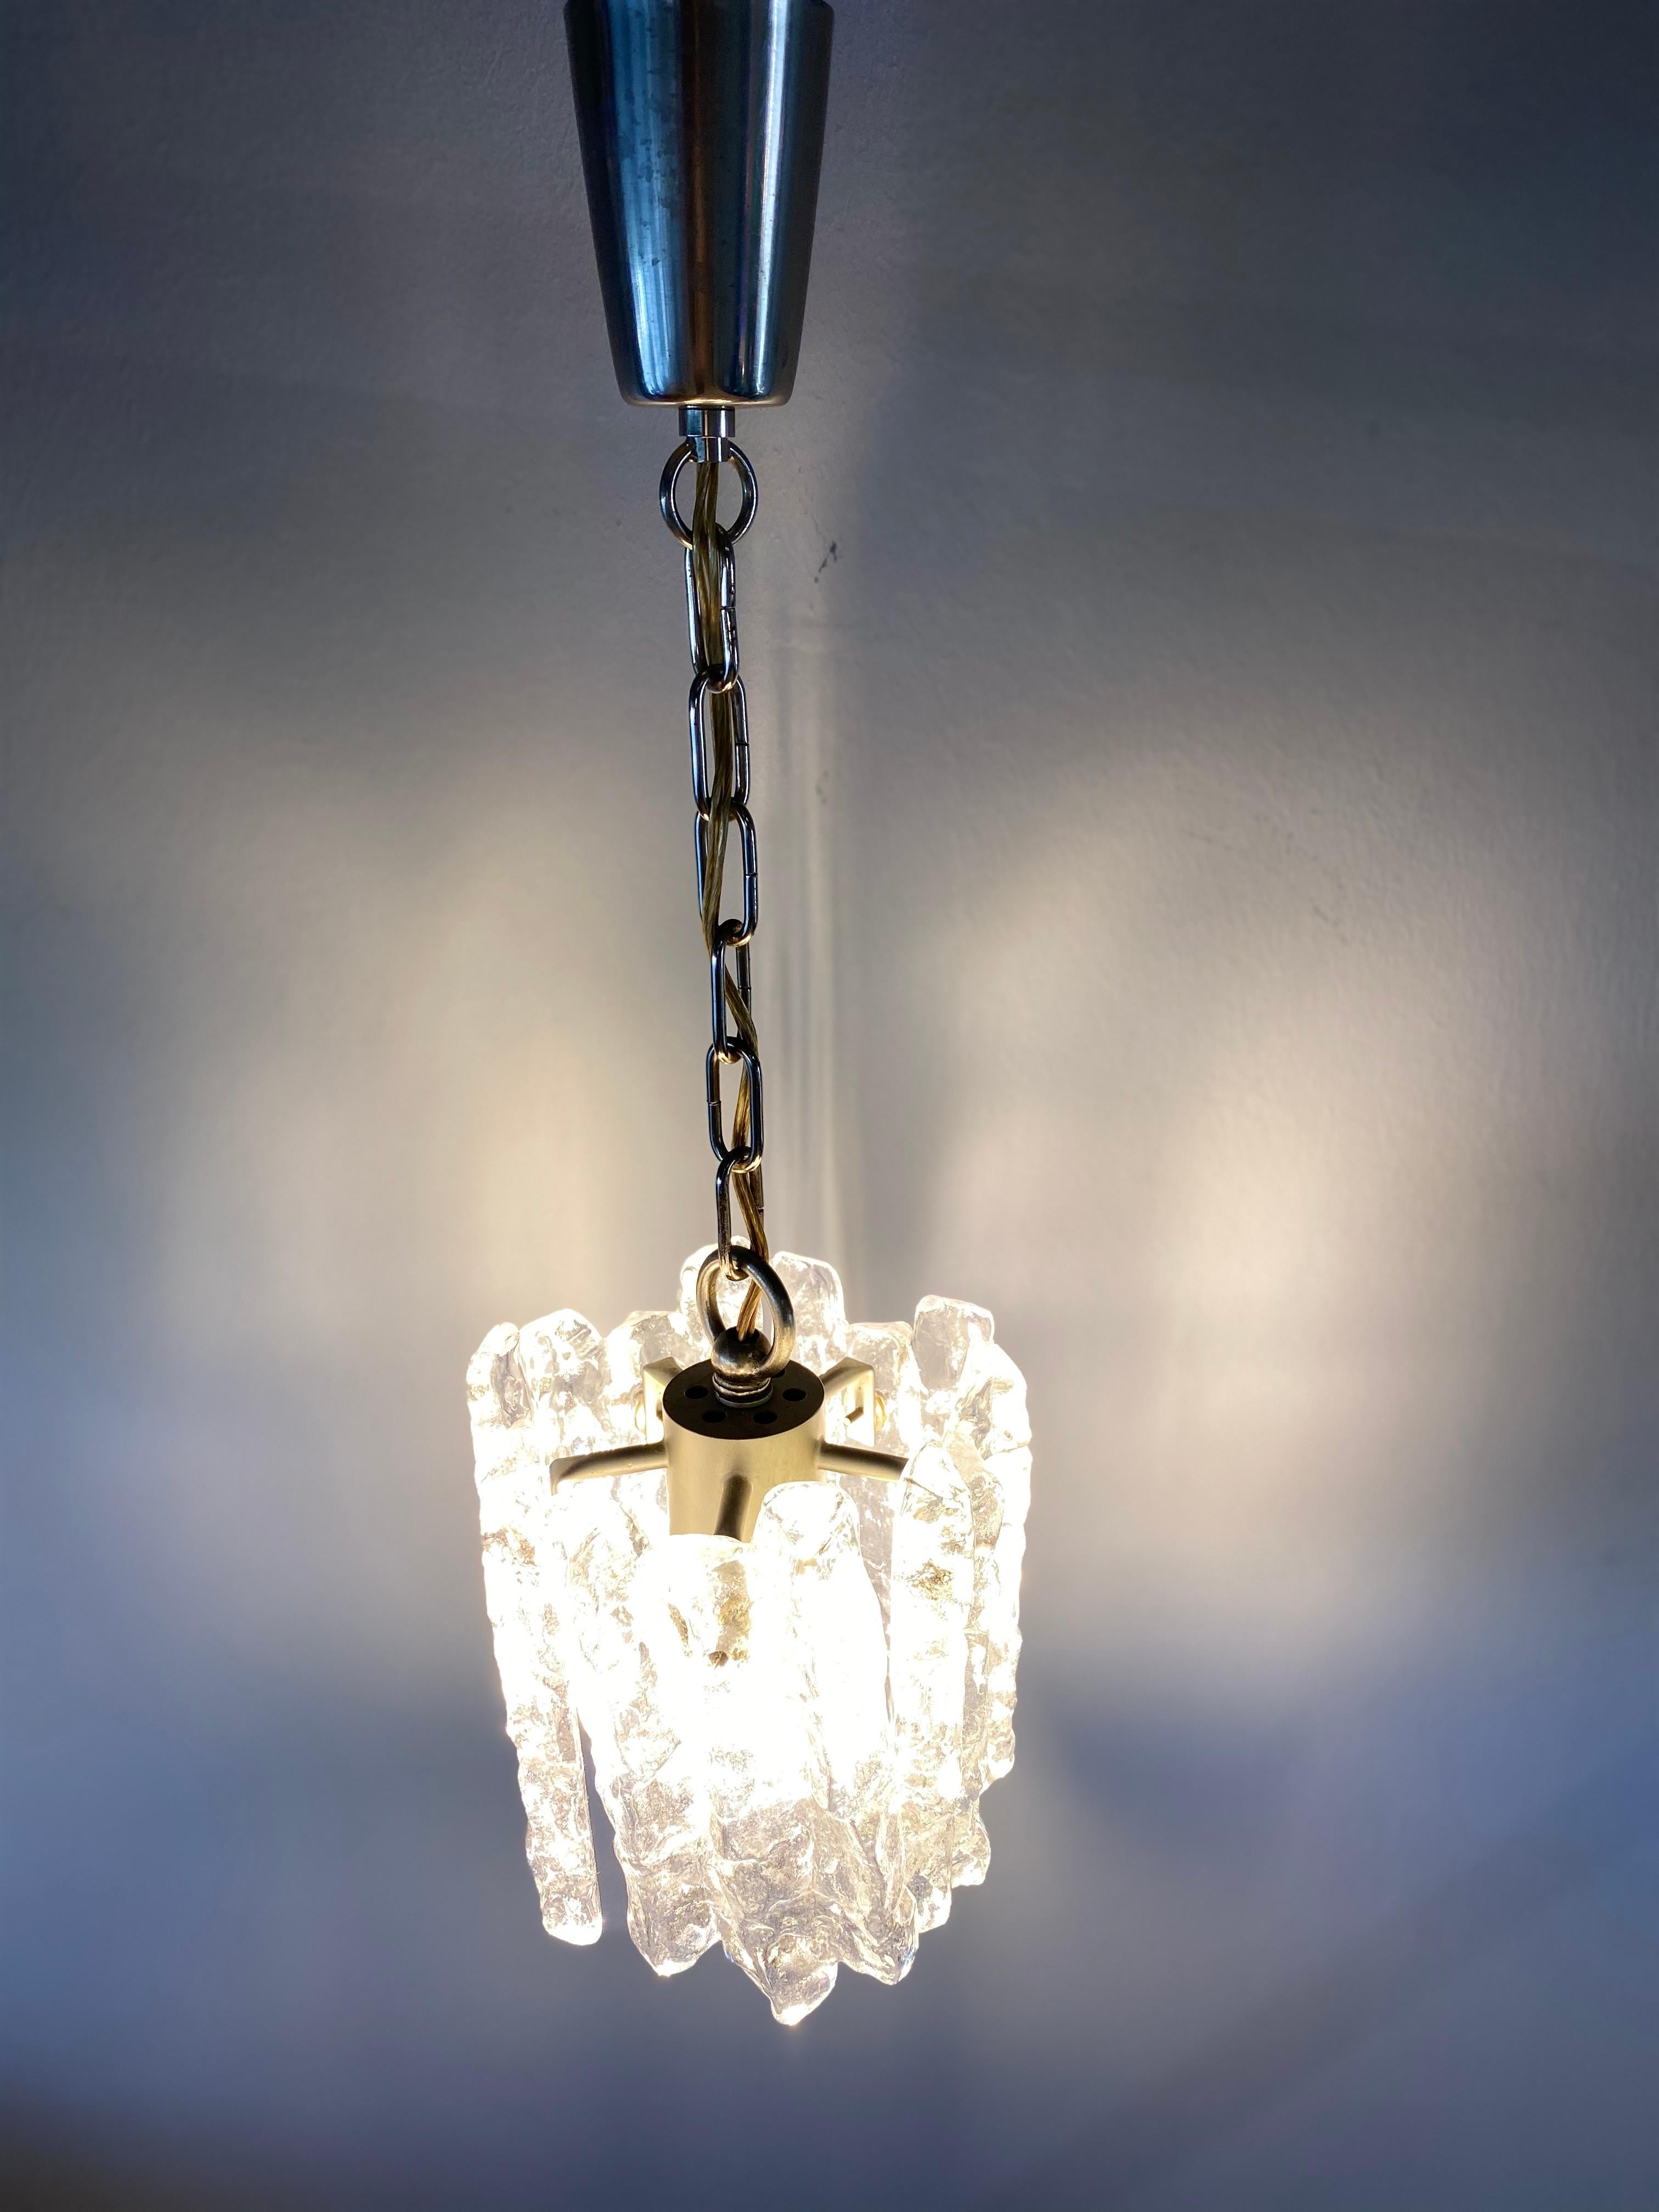 Small J.T. Kalmar 'Ice Glass' Chandelier, 1960s with One Lamp Socket For Sale 7